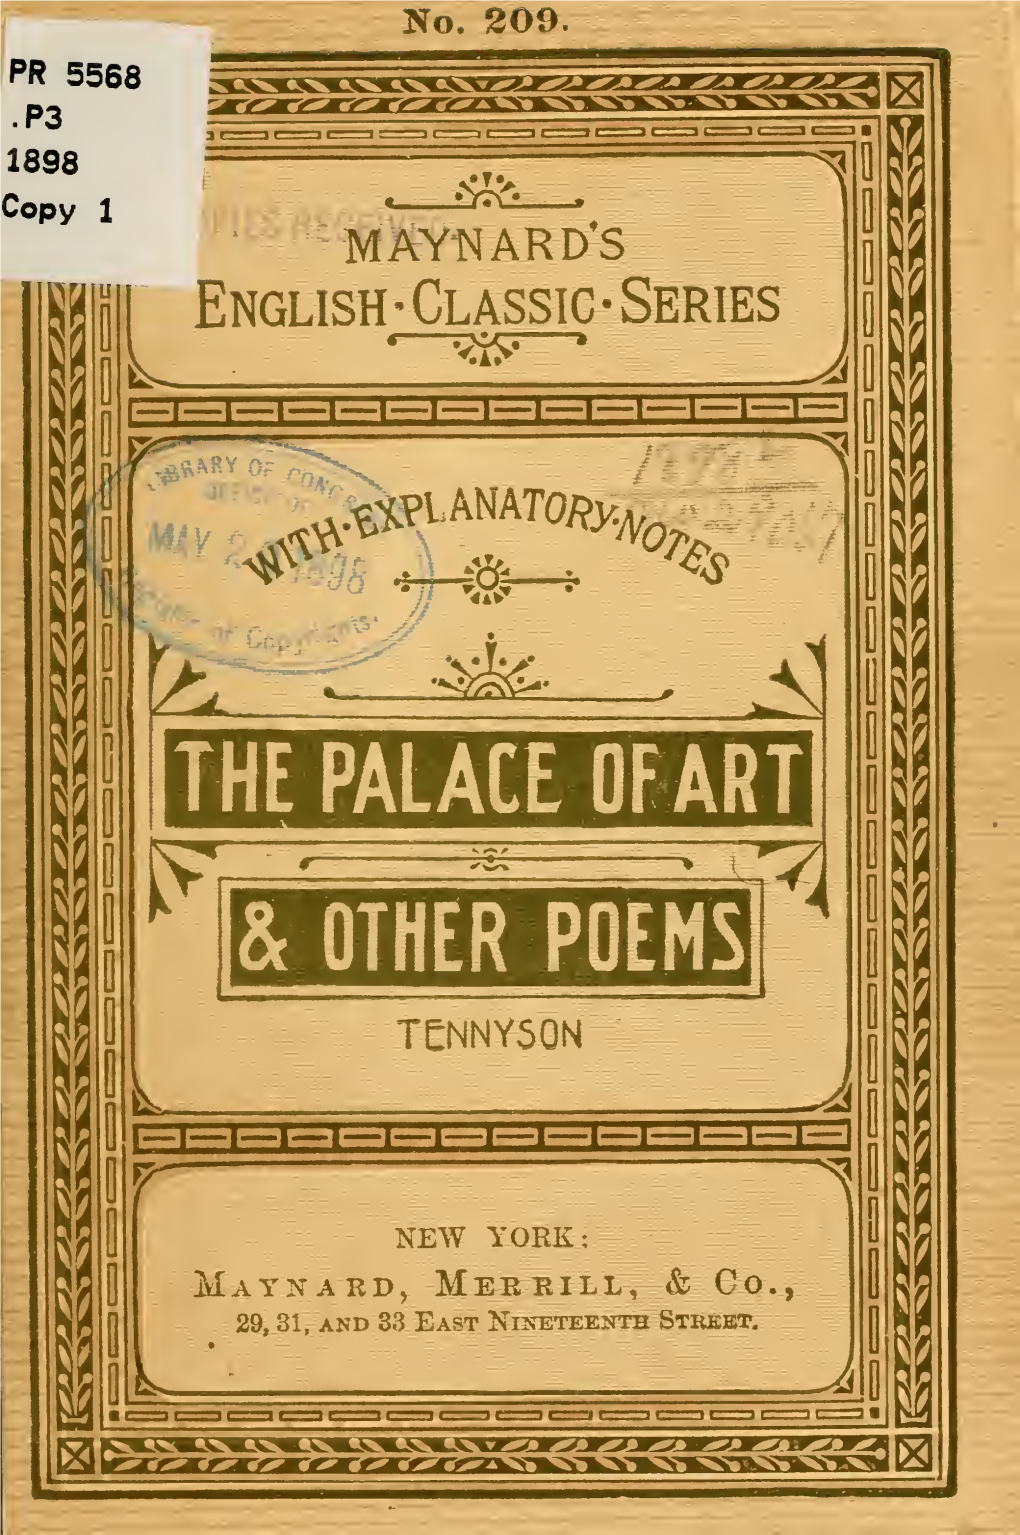 The Palace of Art, and Other Poems